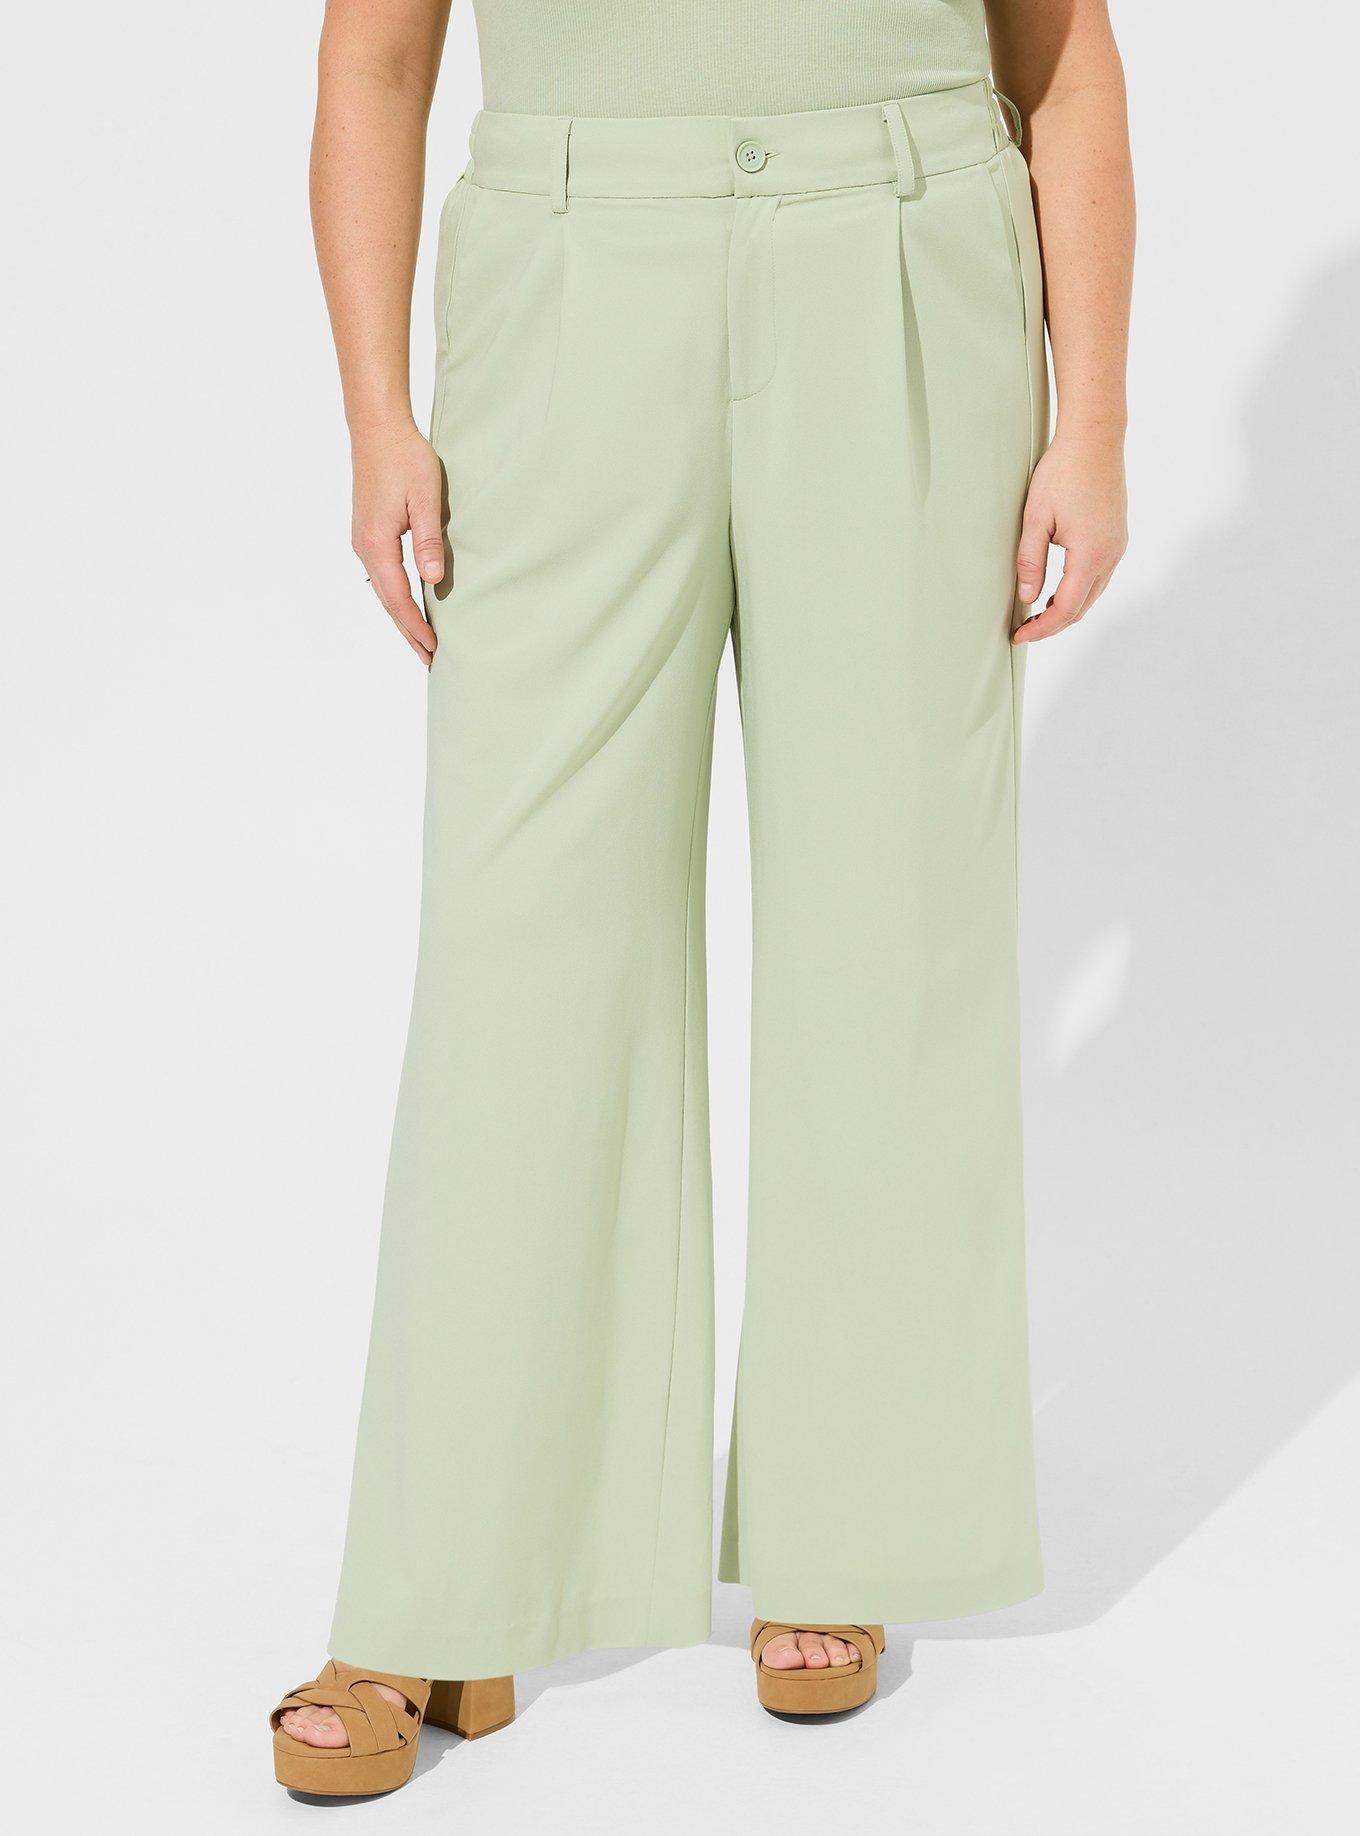 Plus Size - Pull-On Flare Stretch Lurex High-Rise Pant - Torrid